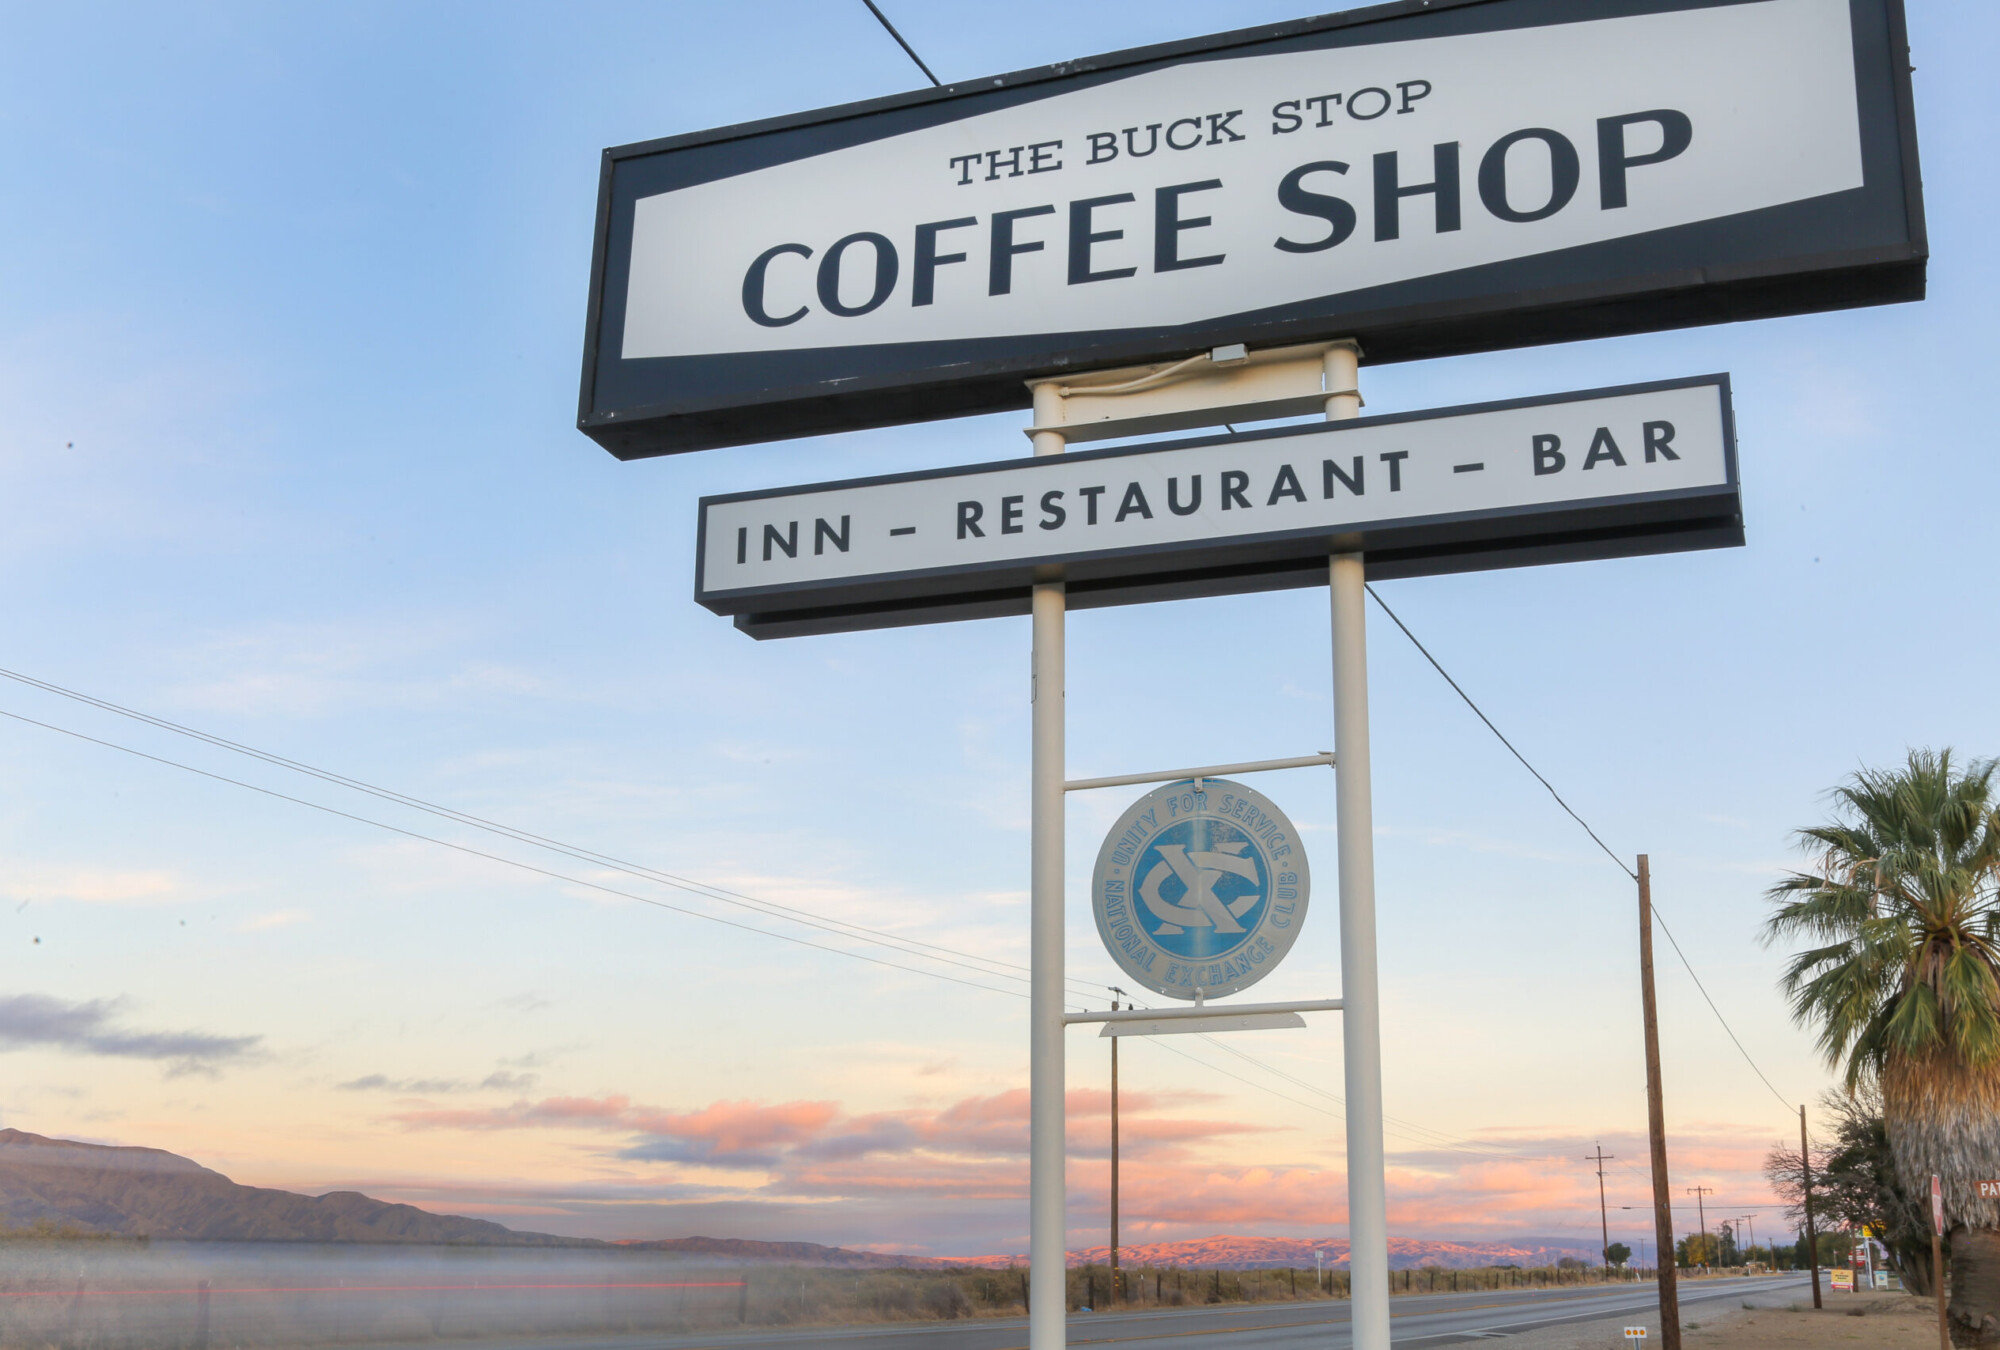 Sunset view of the Coffee Shop called The Buck Stop at the Cuyama Buckhorn in New Cuyama, California.